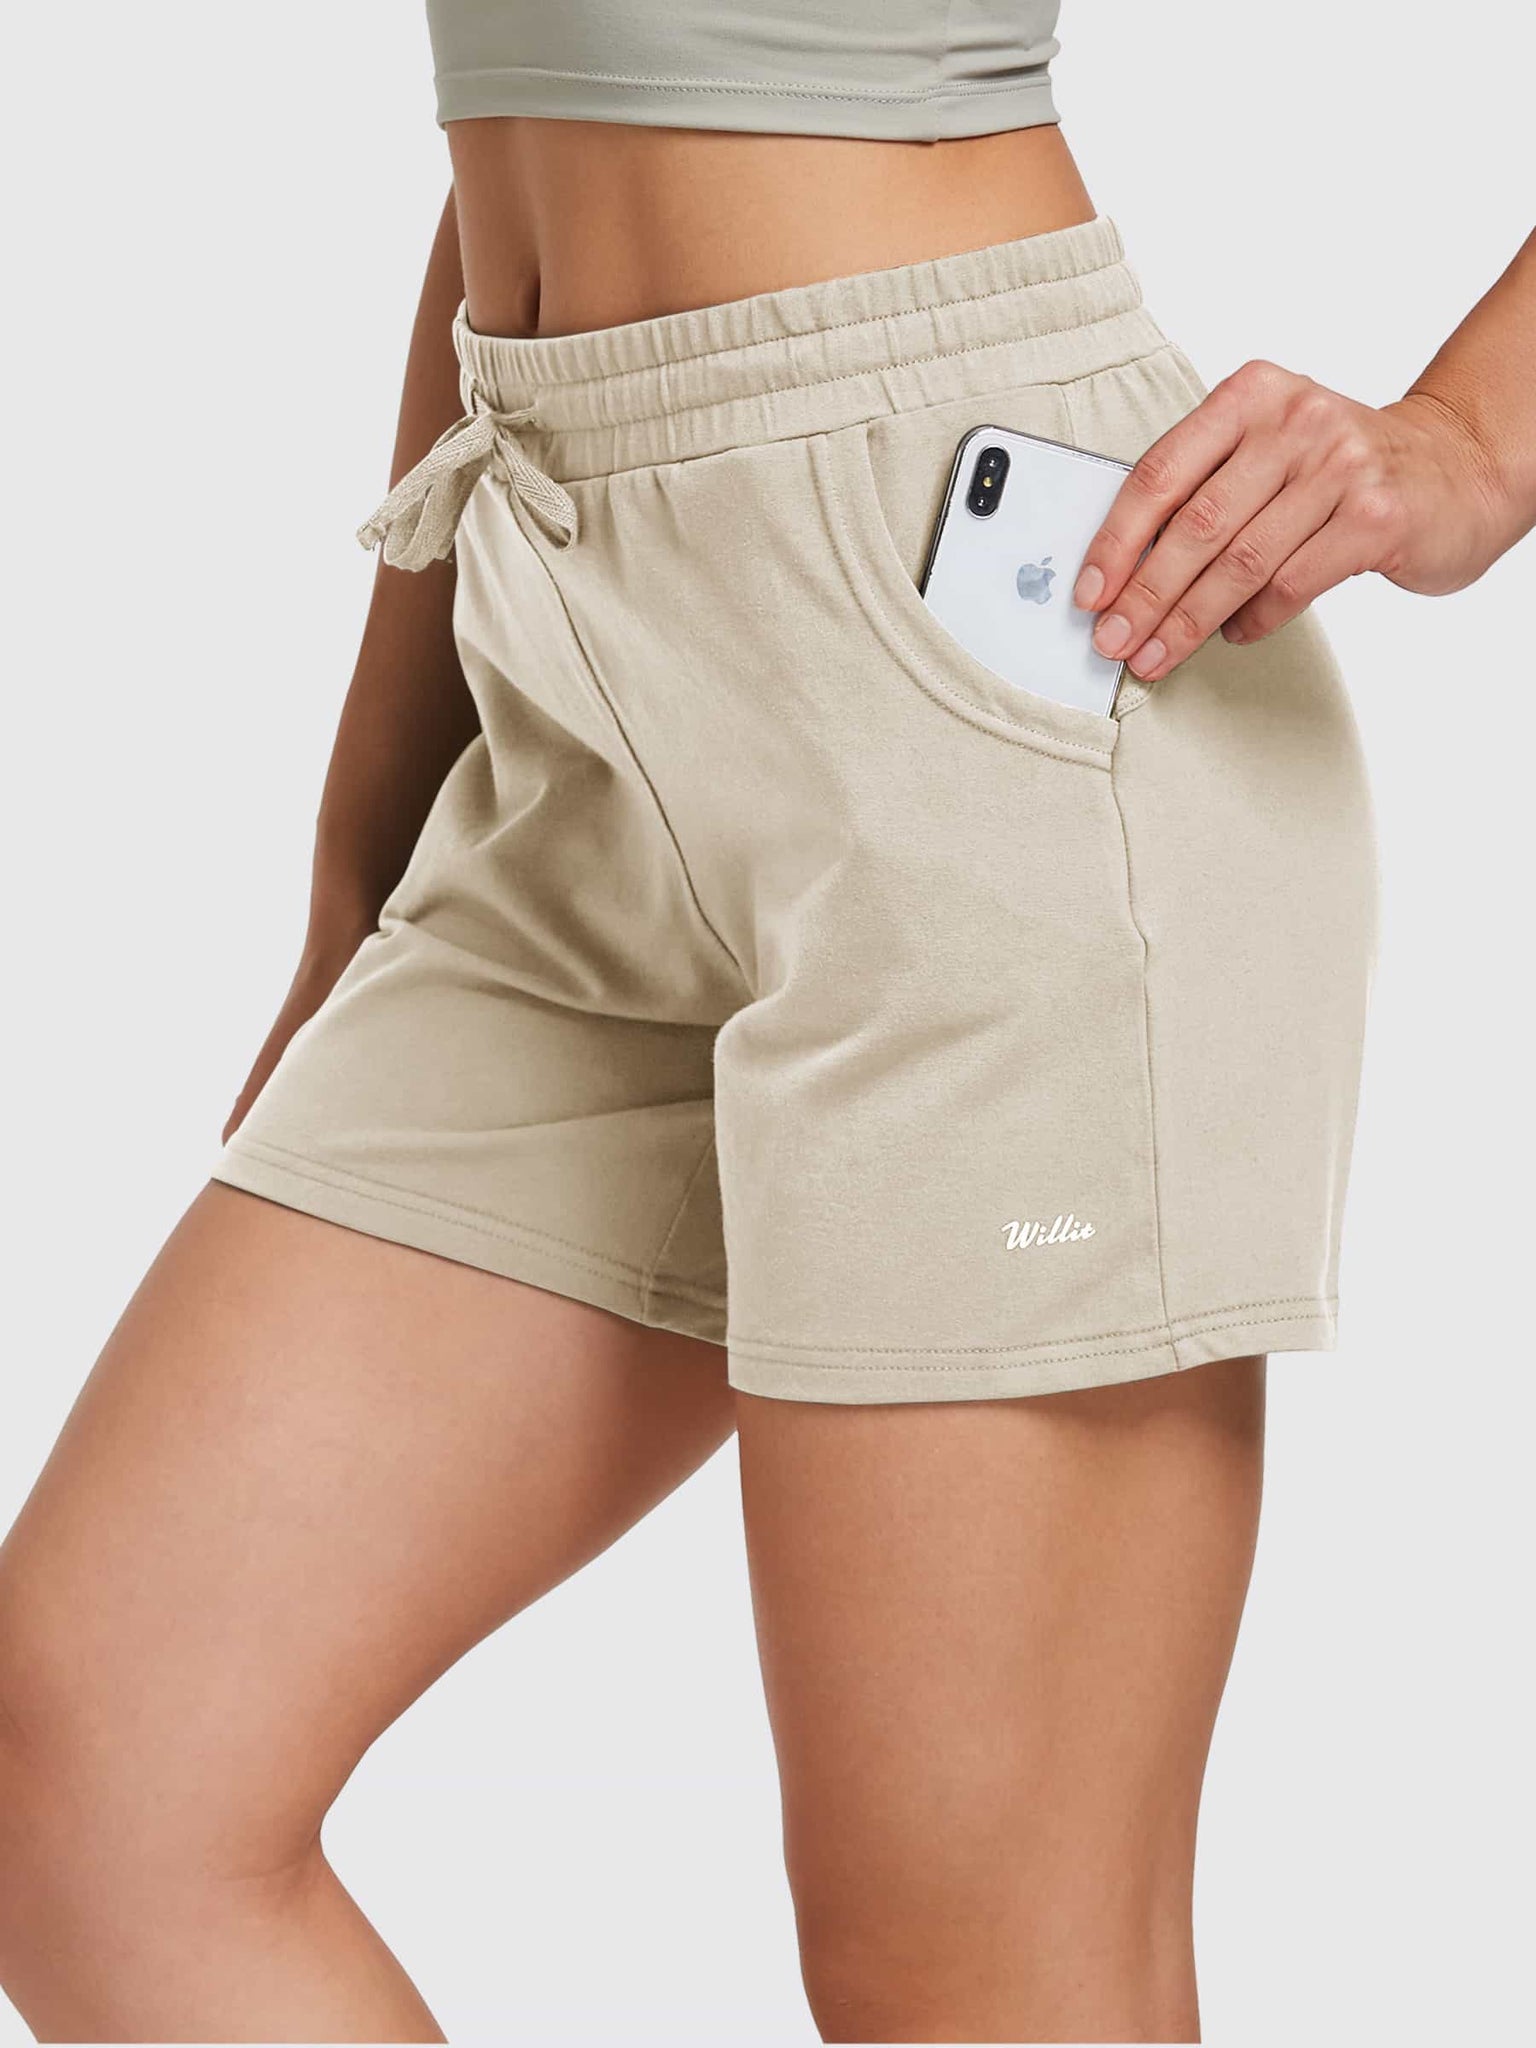 Women's Cotton Shorts with Pockets 5 Inch